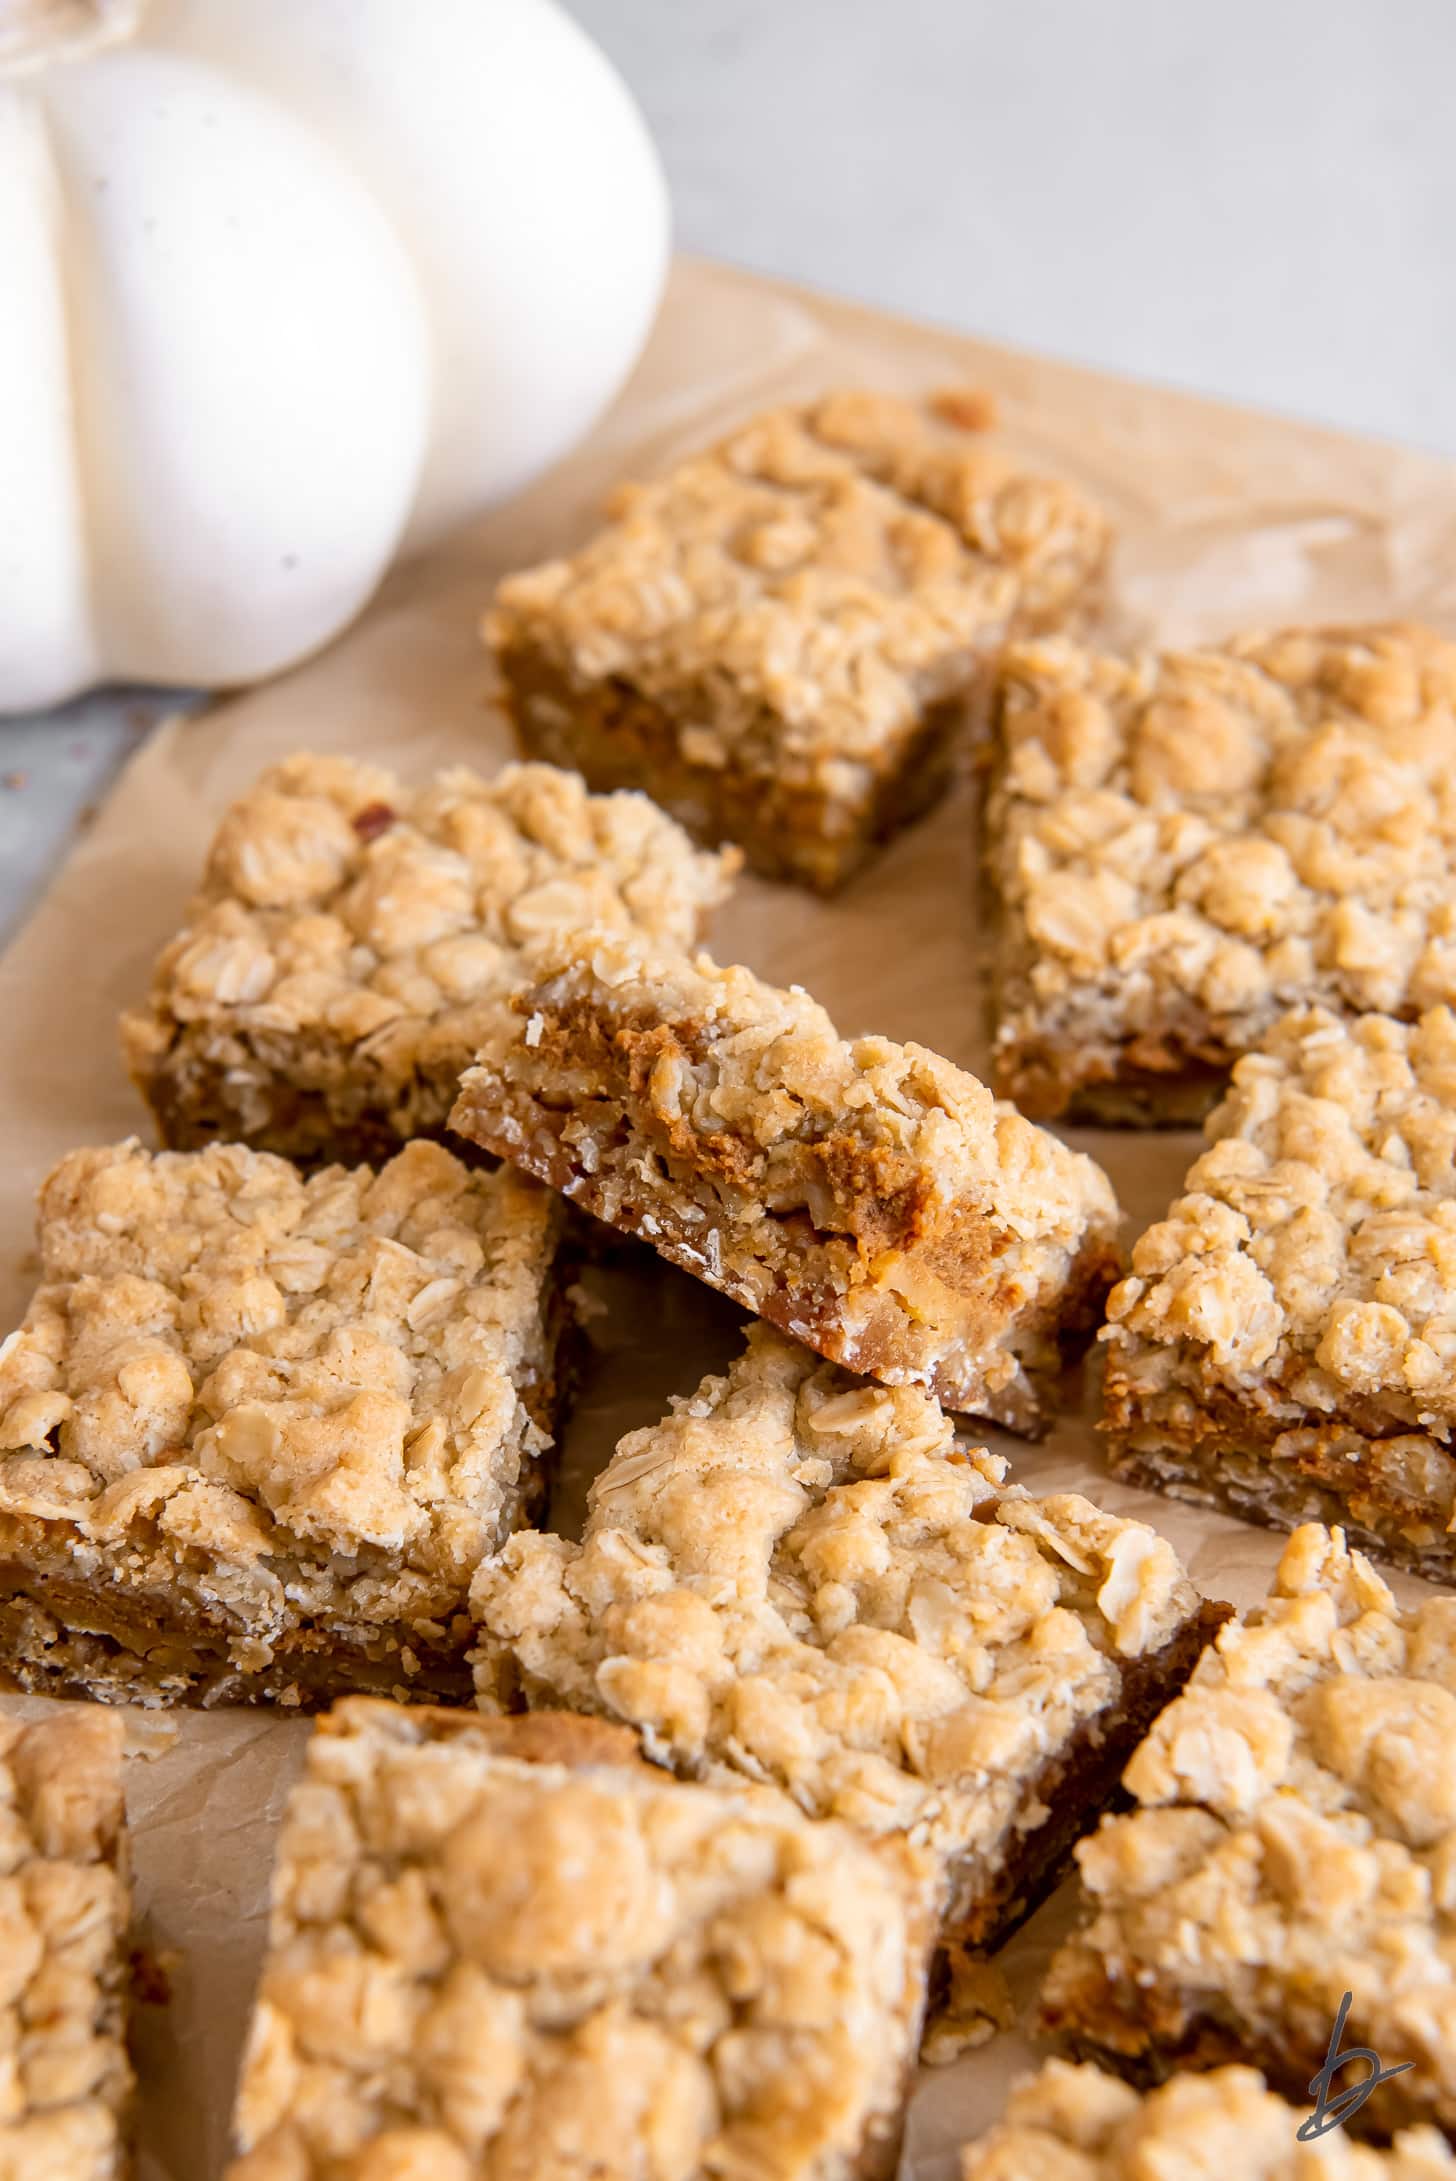 pumpkin pie bars with crumble topping and one bar propped up on other bars.